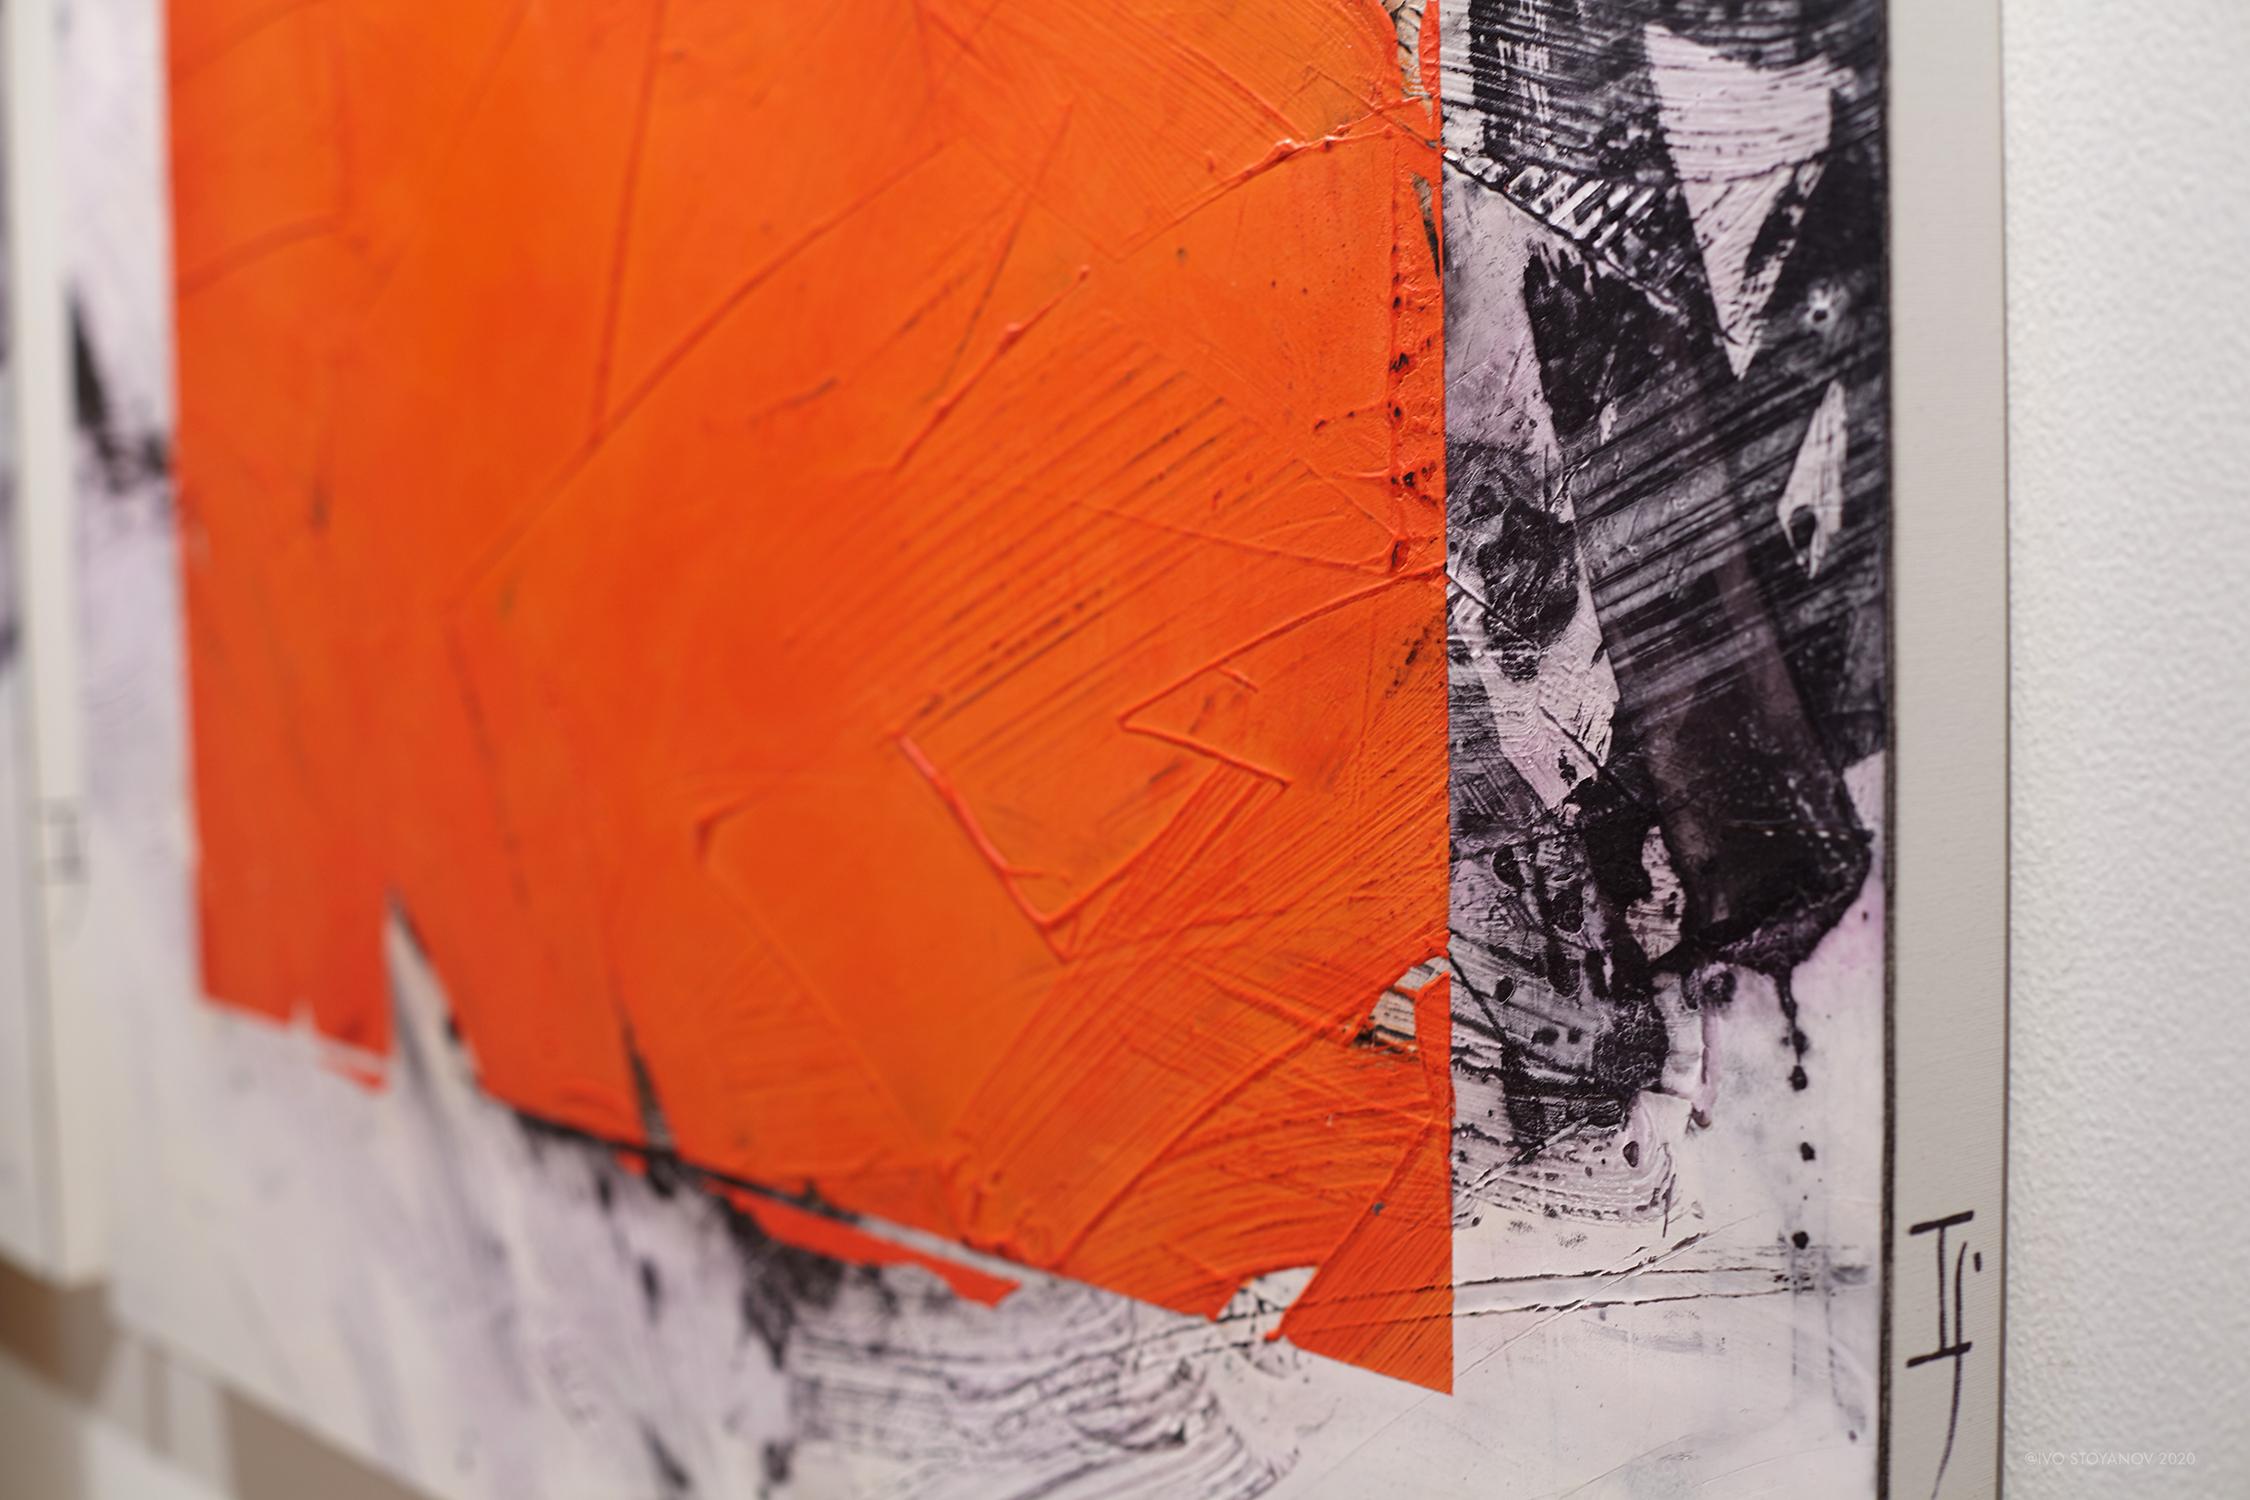 Dark Orange No 41 - bold, abstract shapes, marble dust, acrylic, wax on canvas - Painting by Ivo Stoyanov